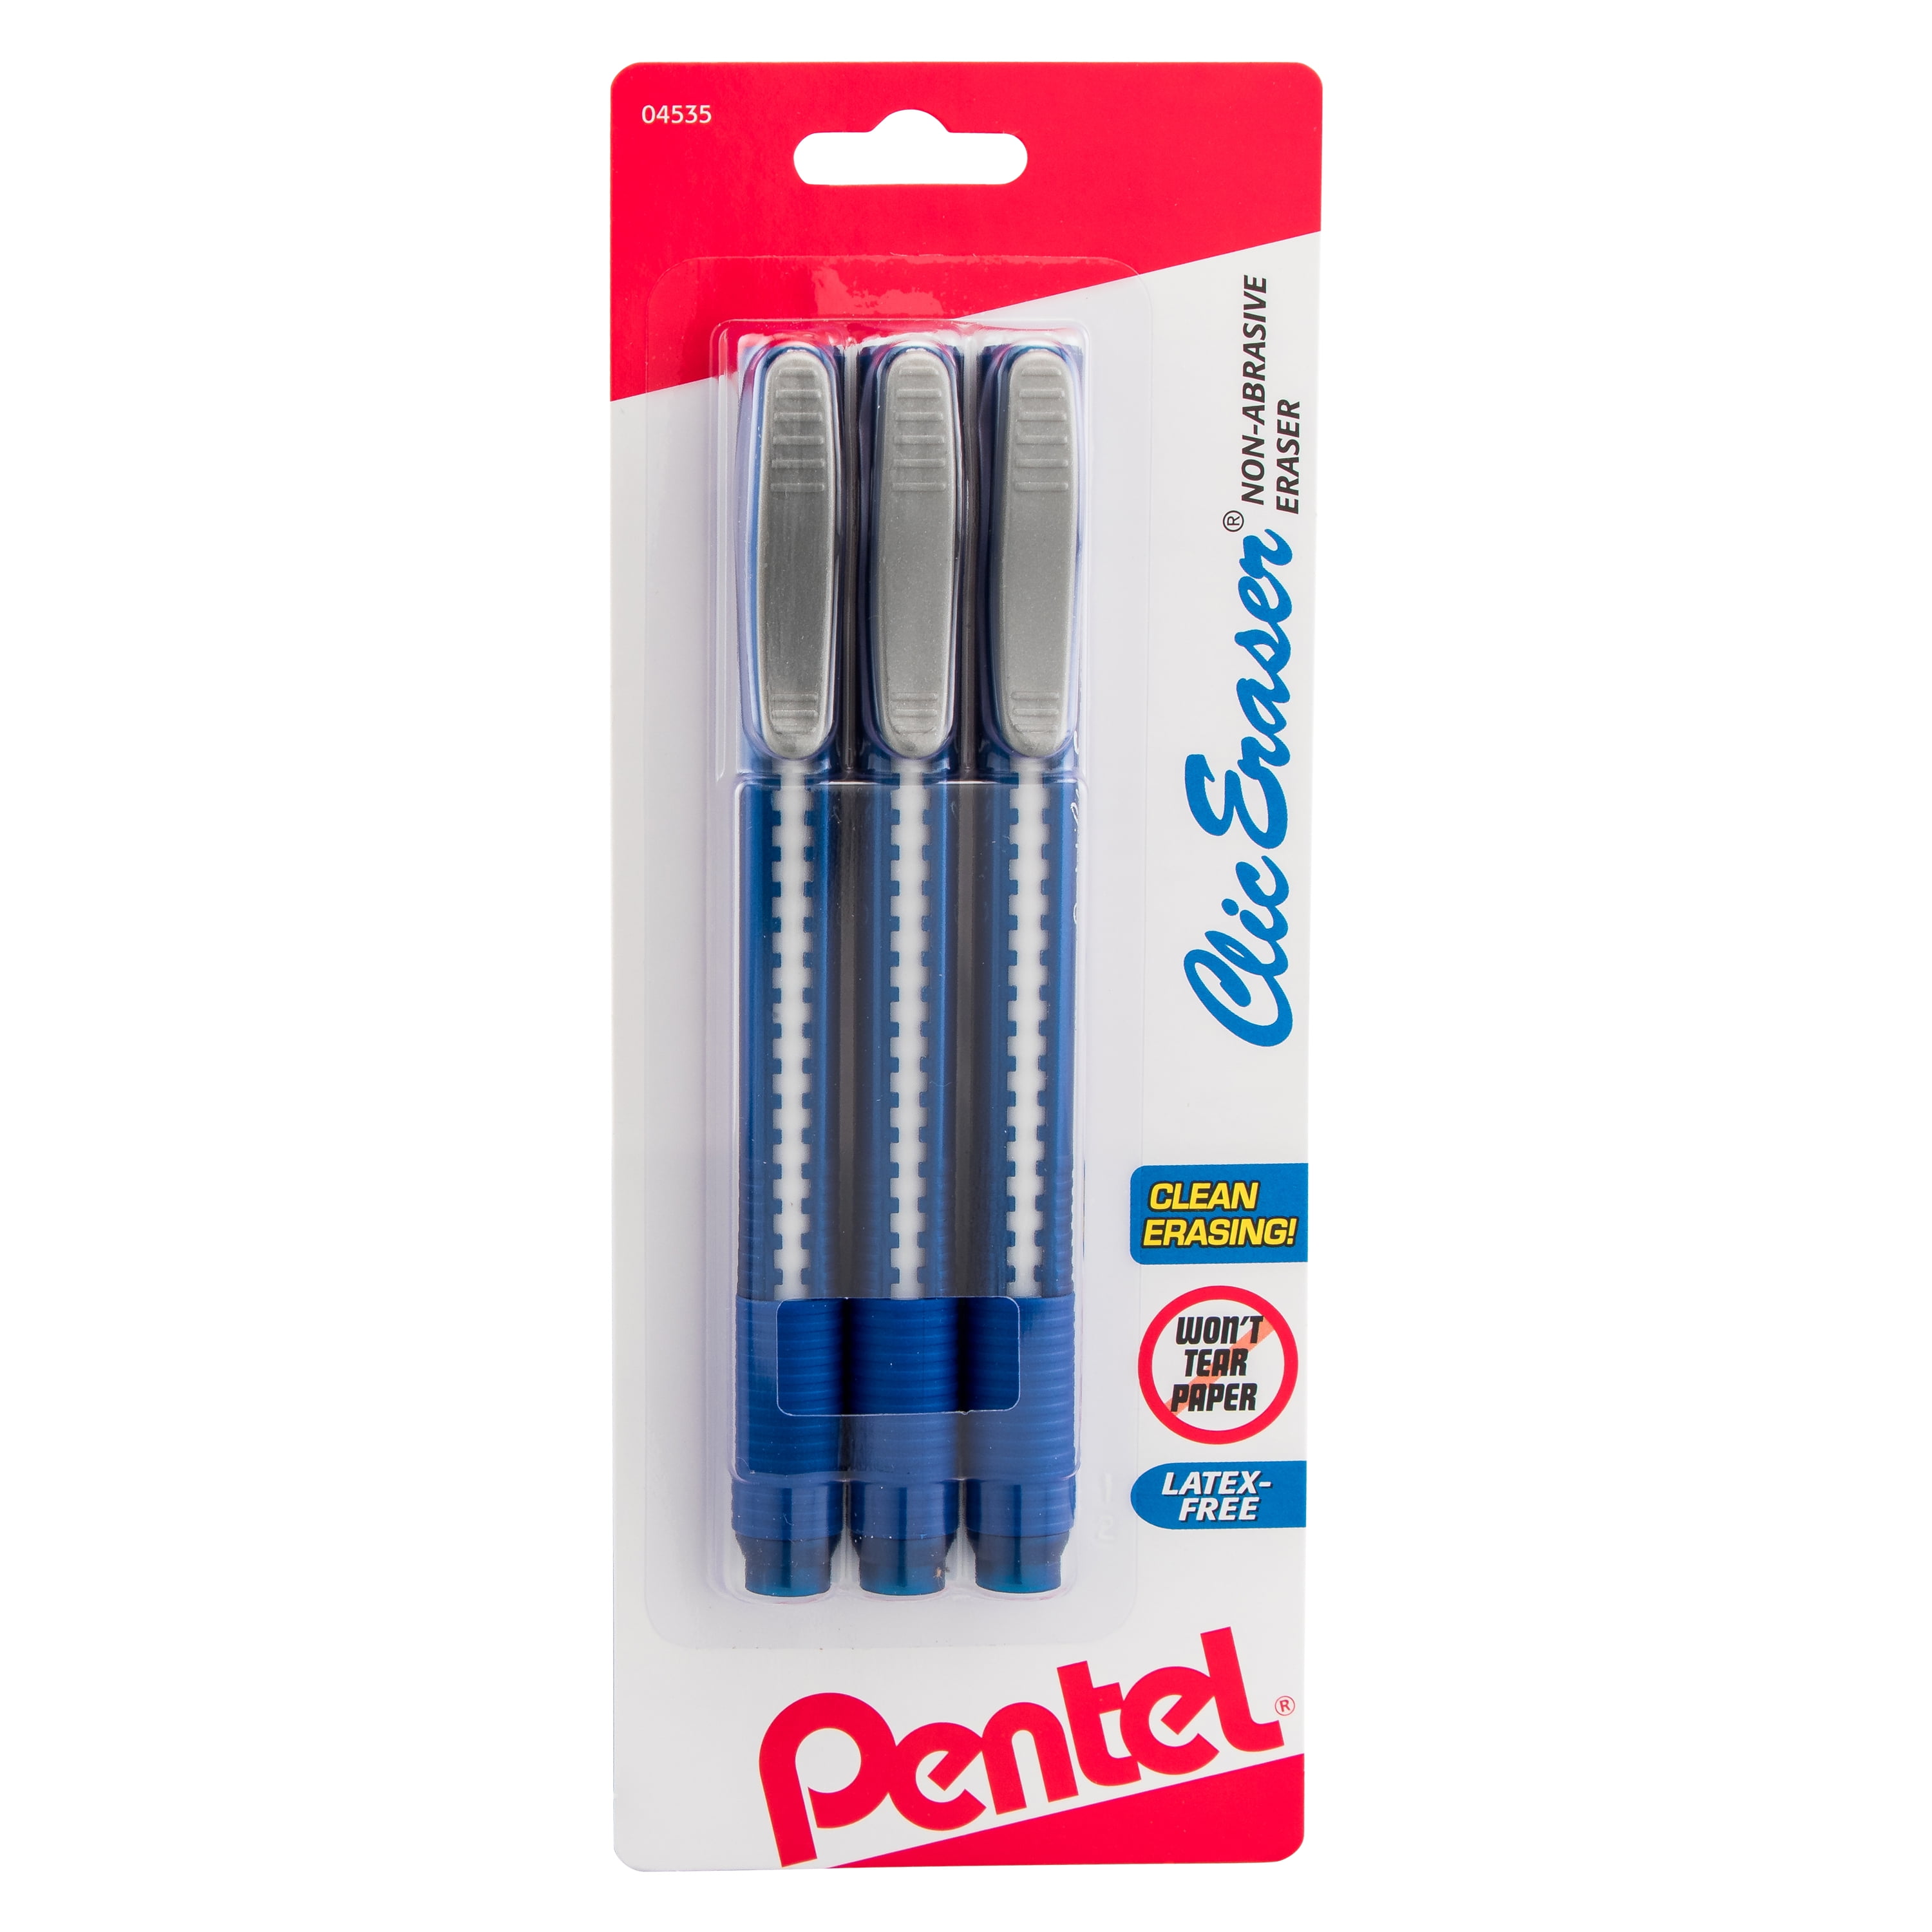 Retractable Eraser Pen Style Grip Pack of 5 Assorted Colors with 3 Refills Pentel Clic Eraser 